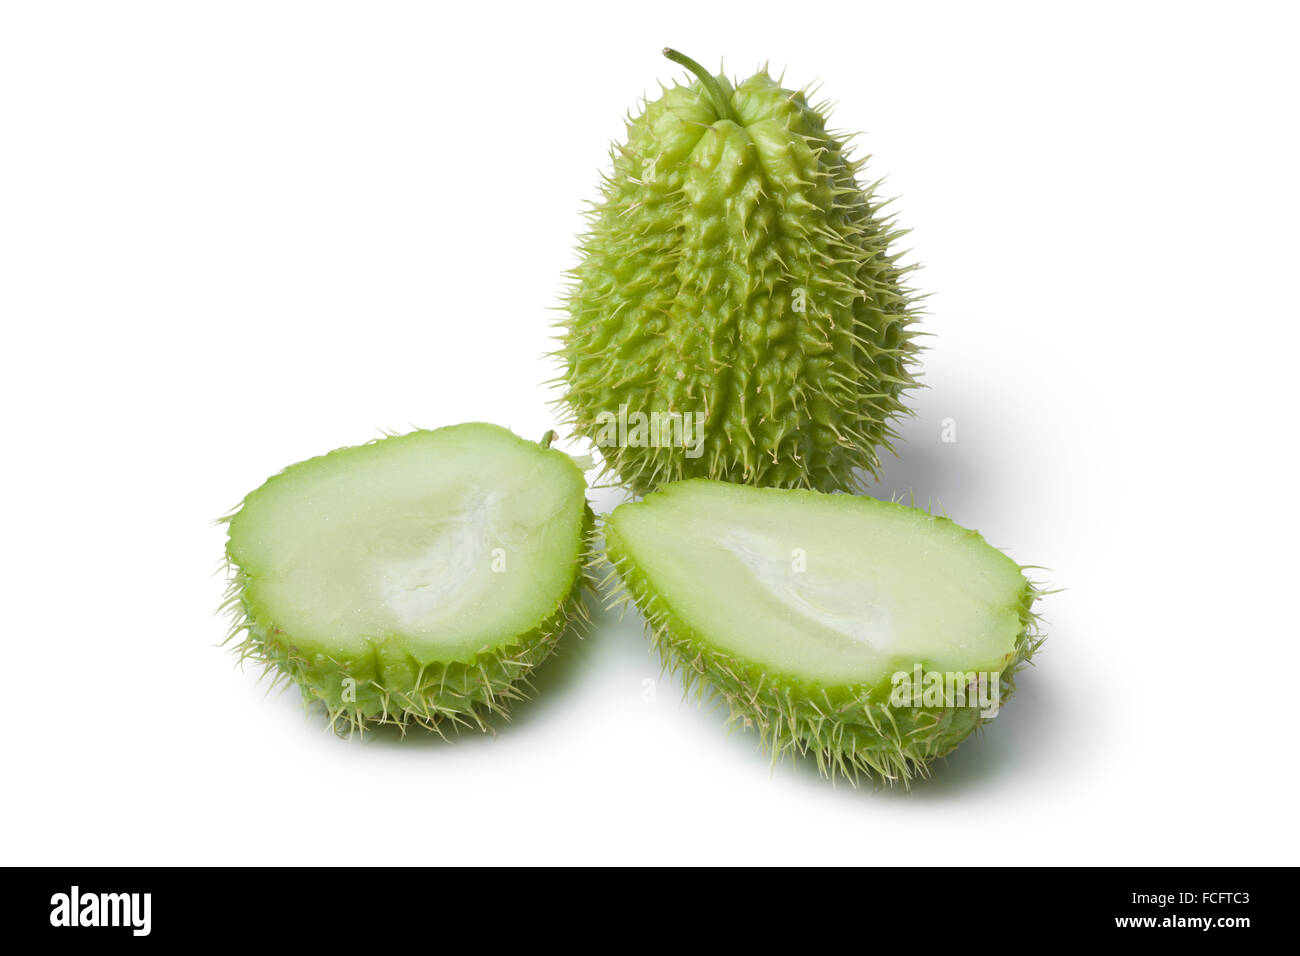 Whole and half spined fresh chayote fruit on white background Stock Photo